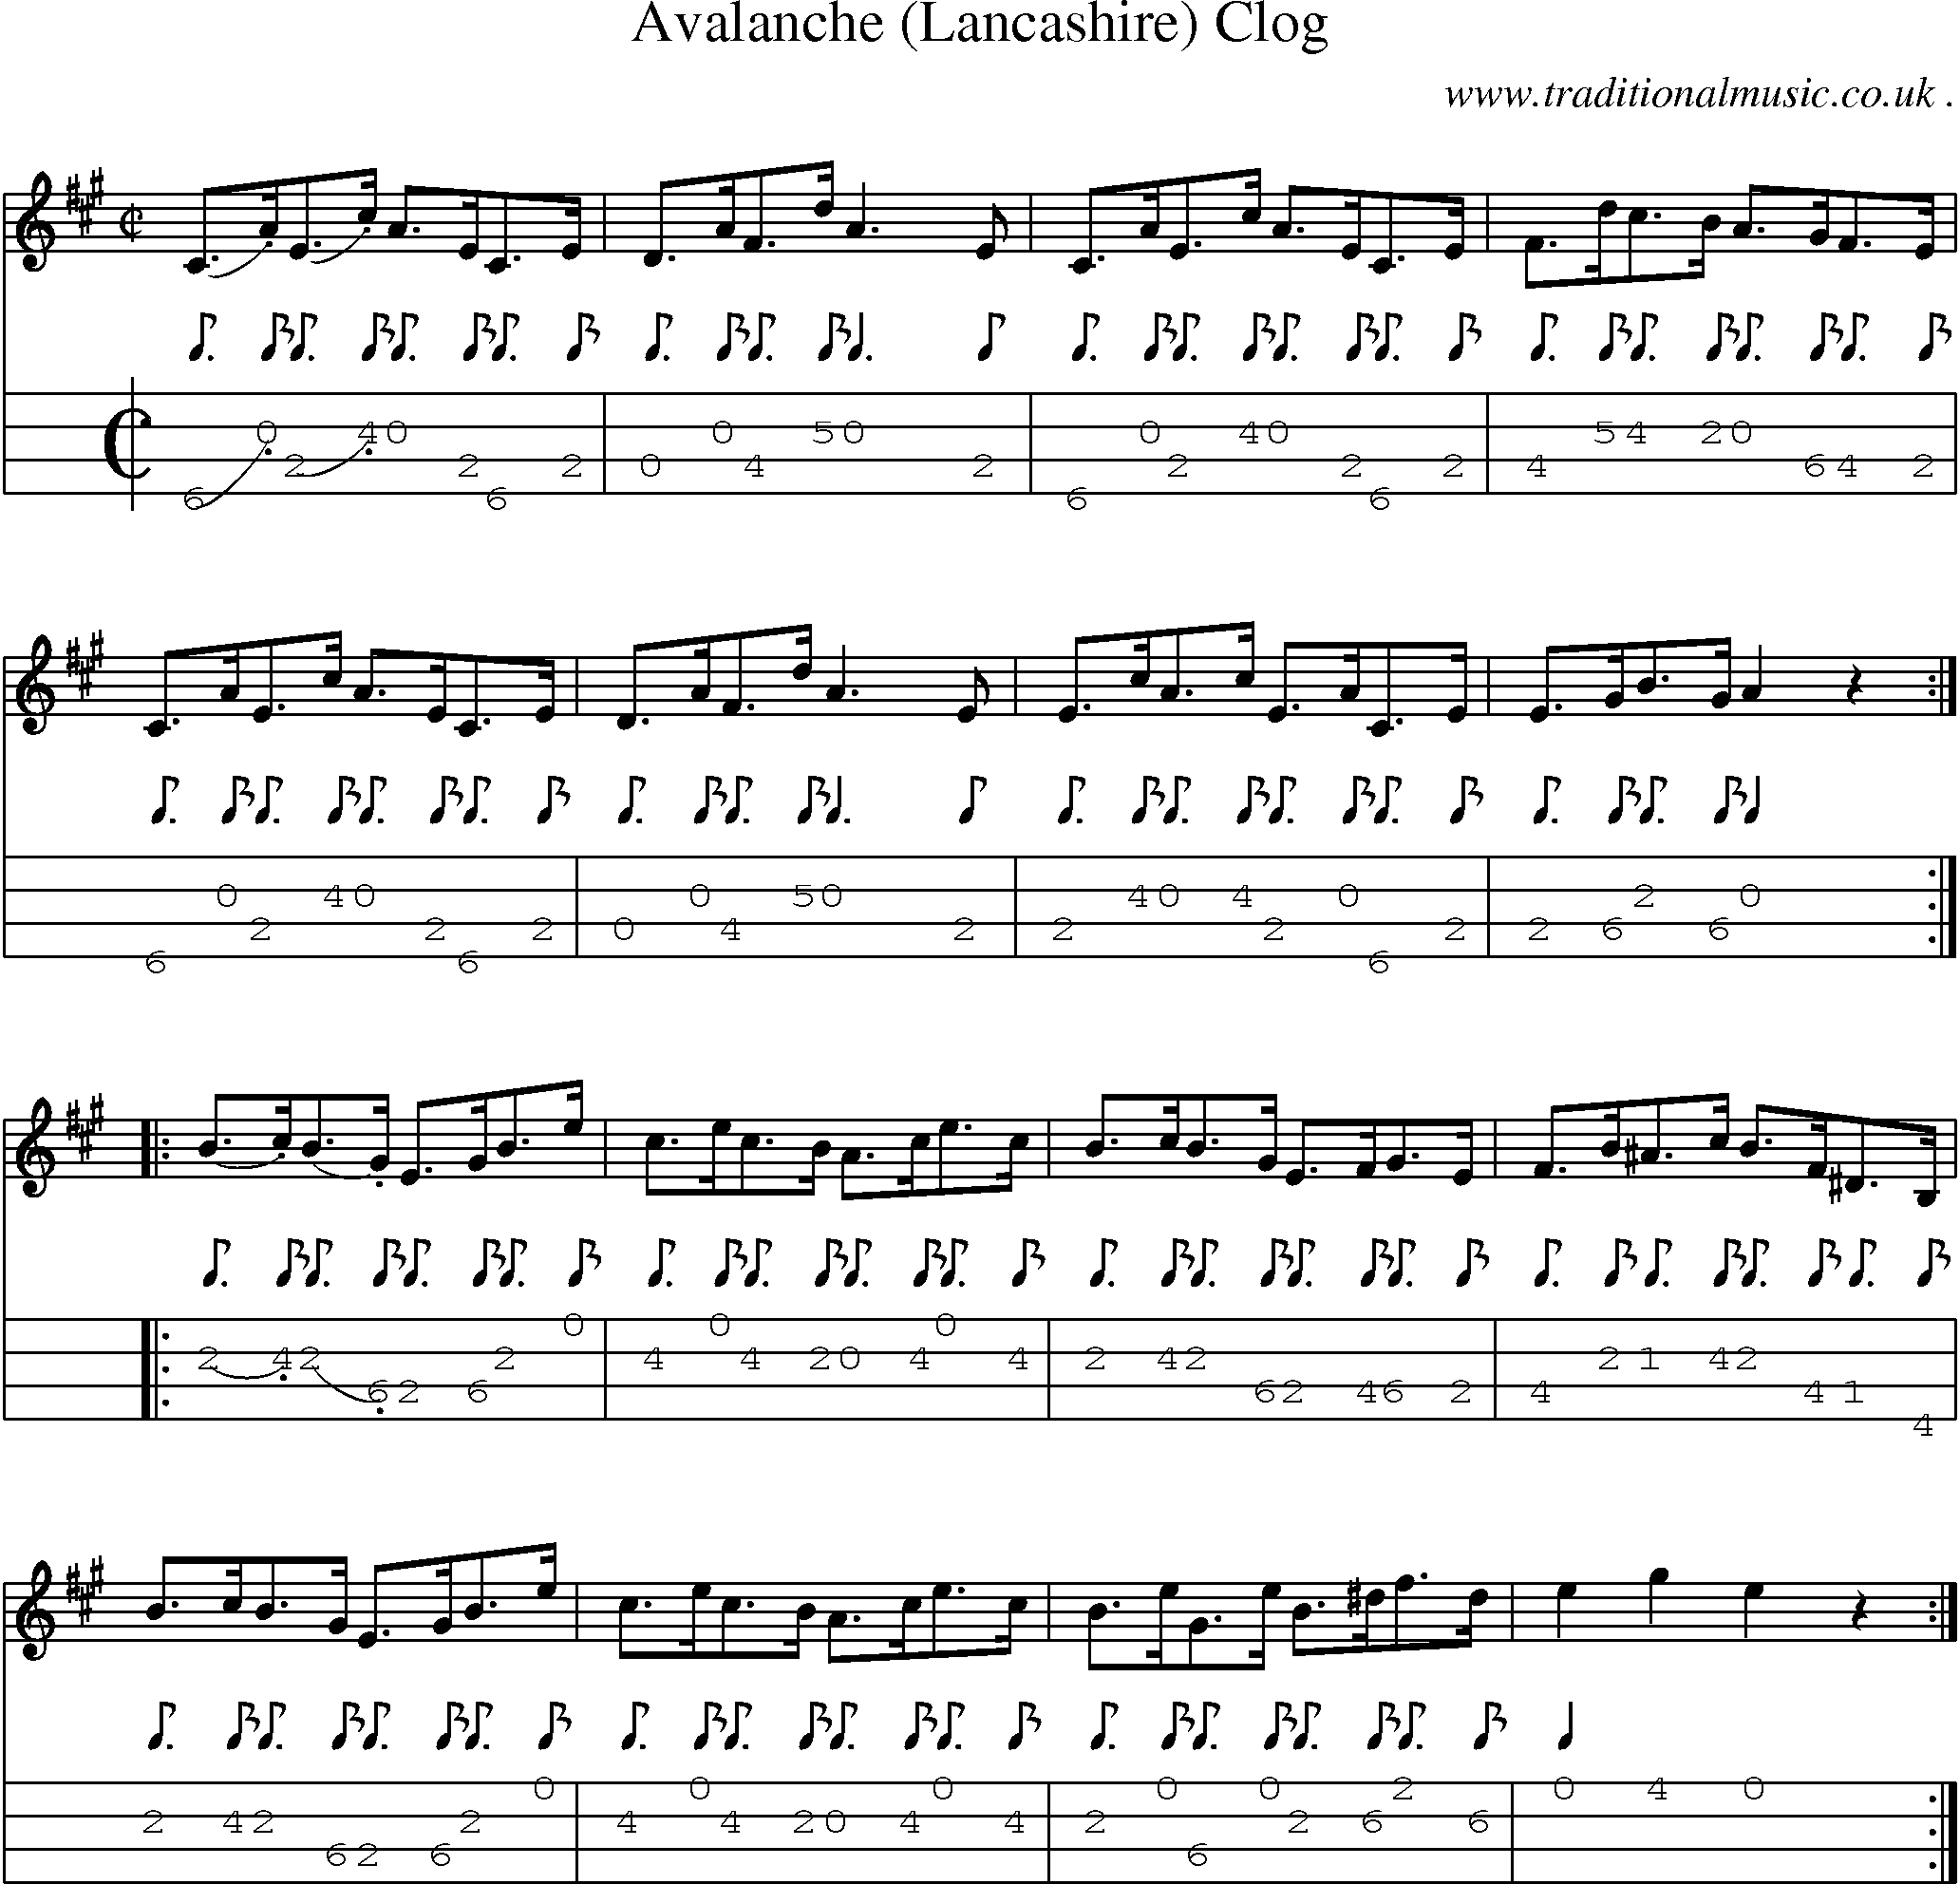 Sheet-Music and Mandolin Tabs for Avalanche (lancashire) Clog